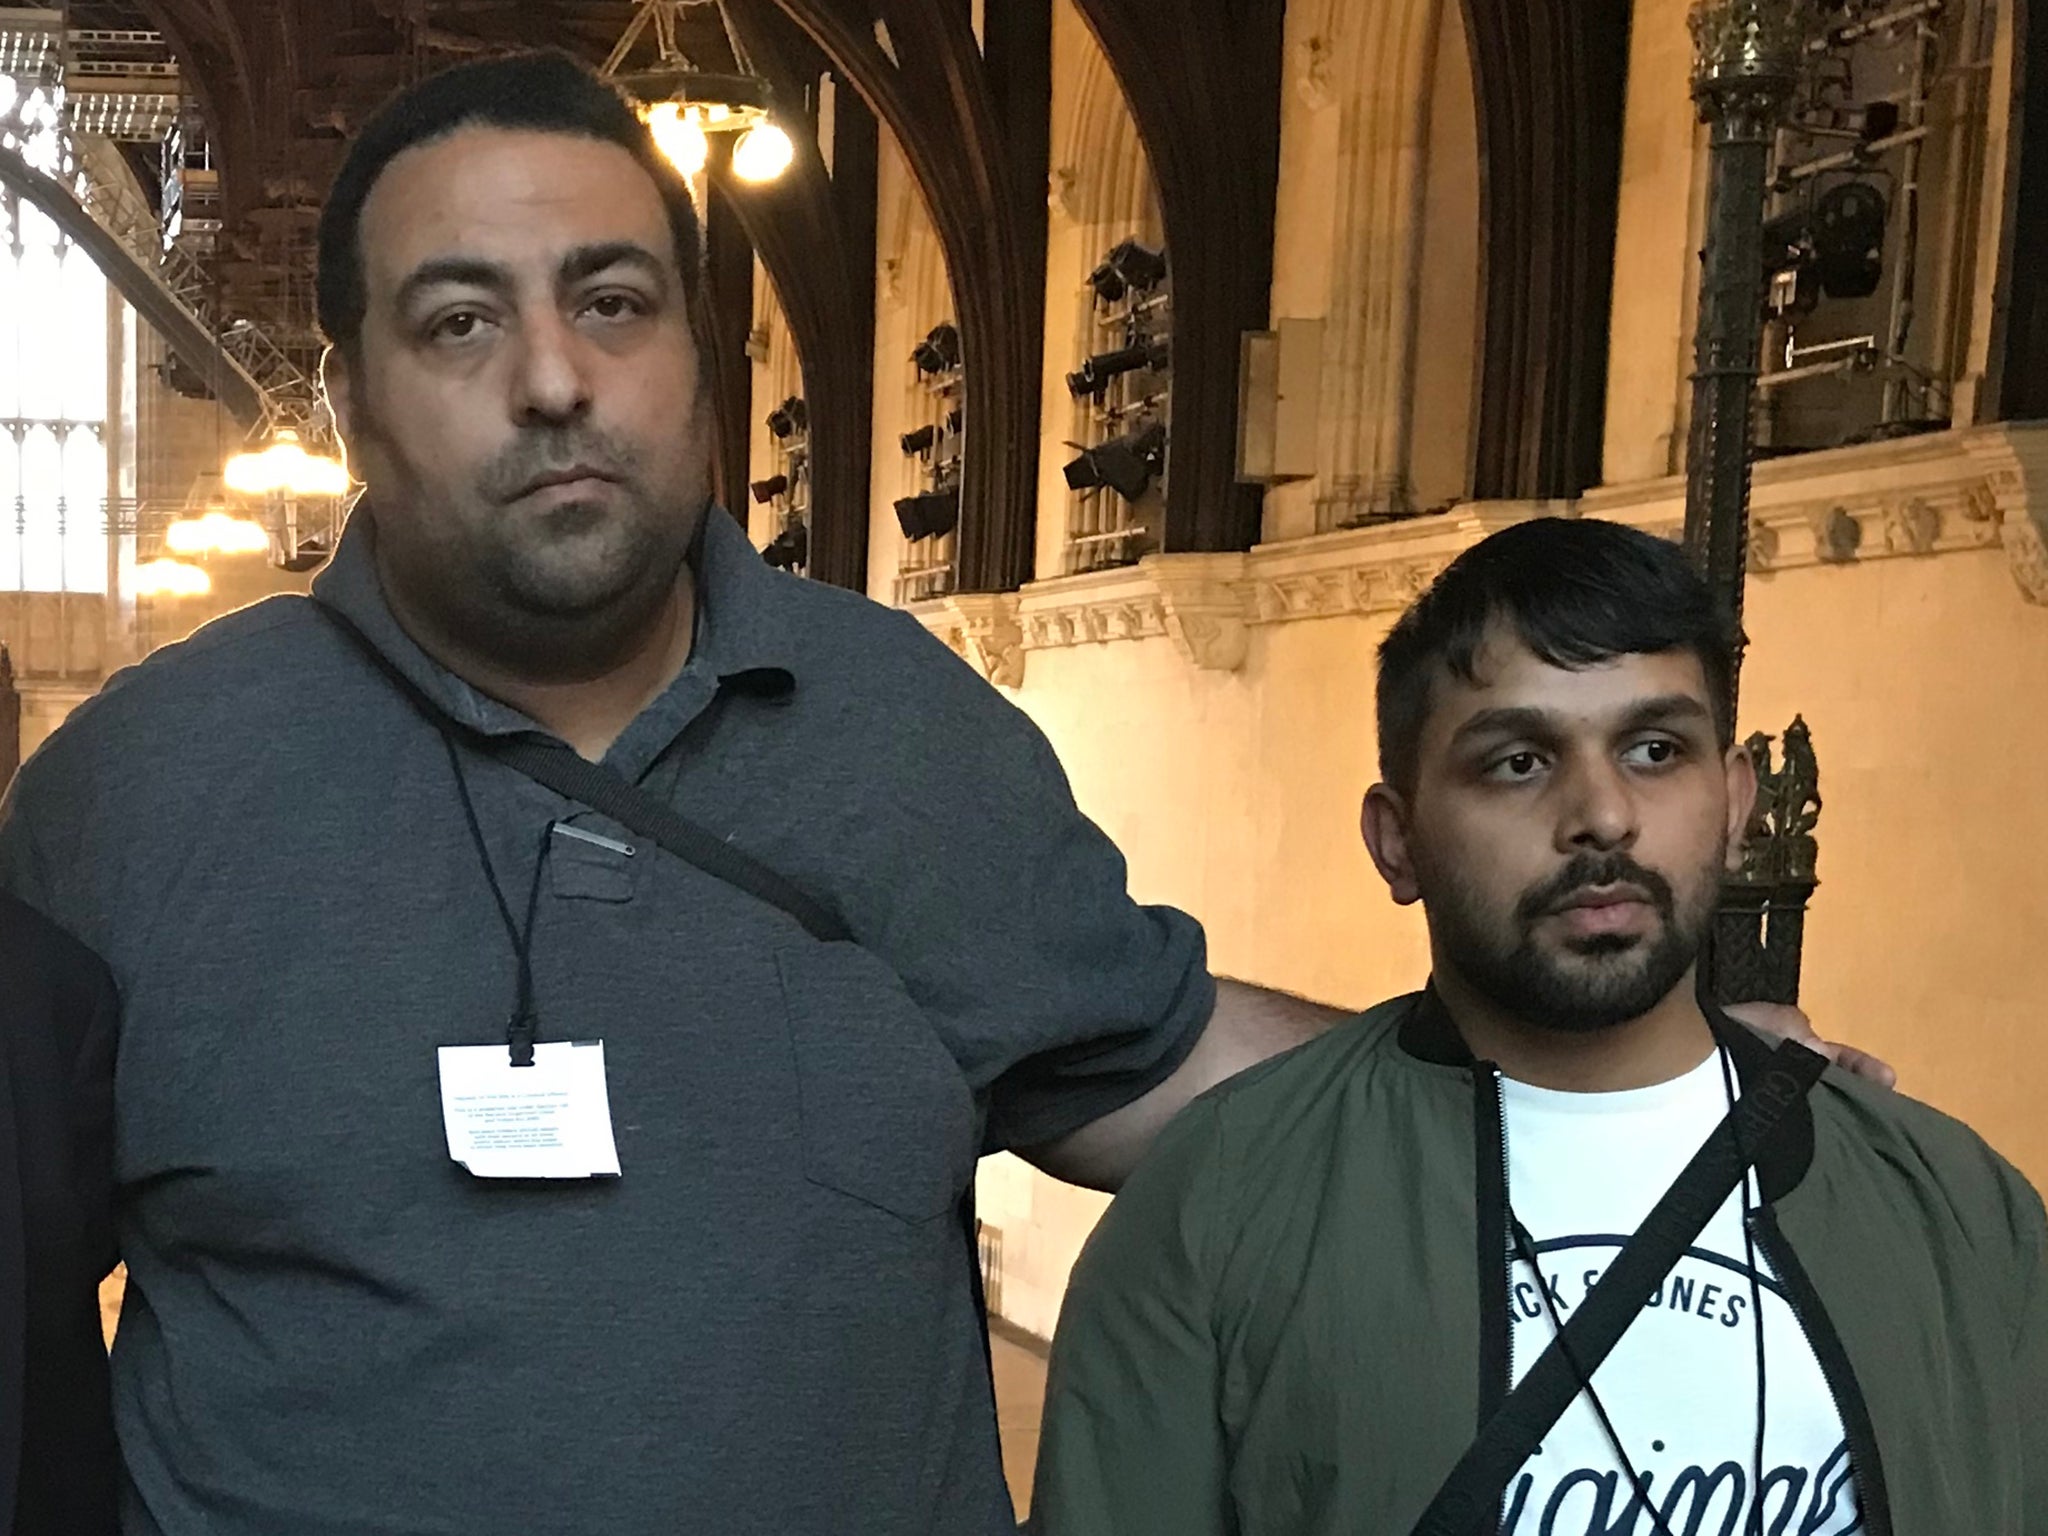 Nabil Choucair and Mohammed Hakim, who both lost multiple family members in the blaze, said they felt there was a shortfall in support for bereaved relatives